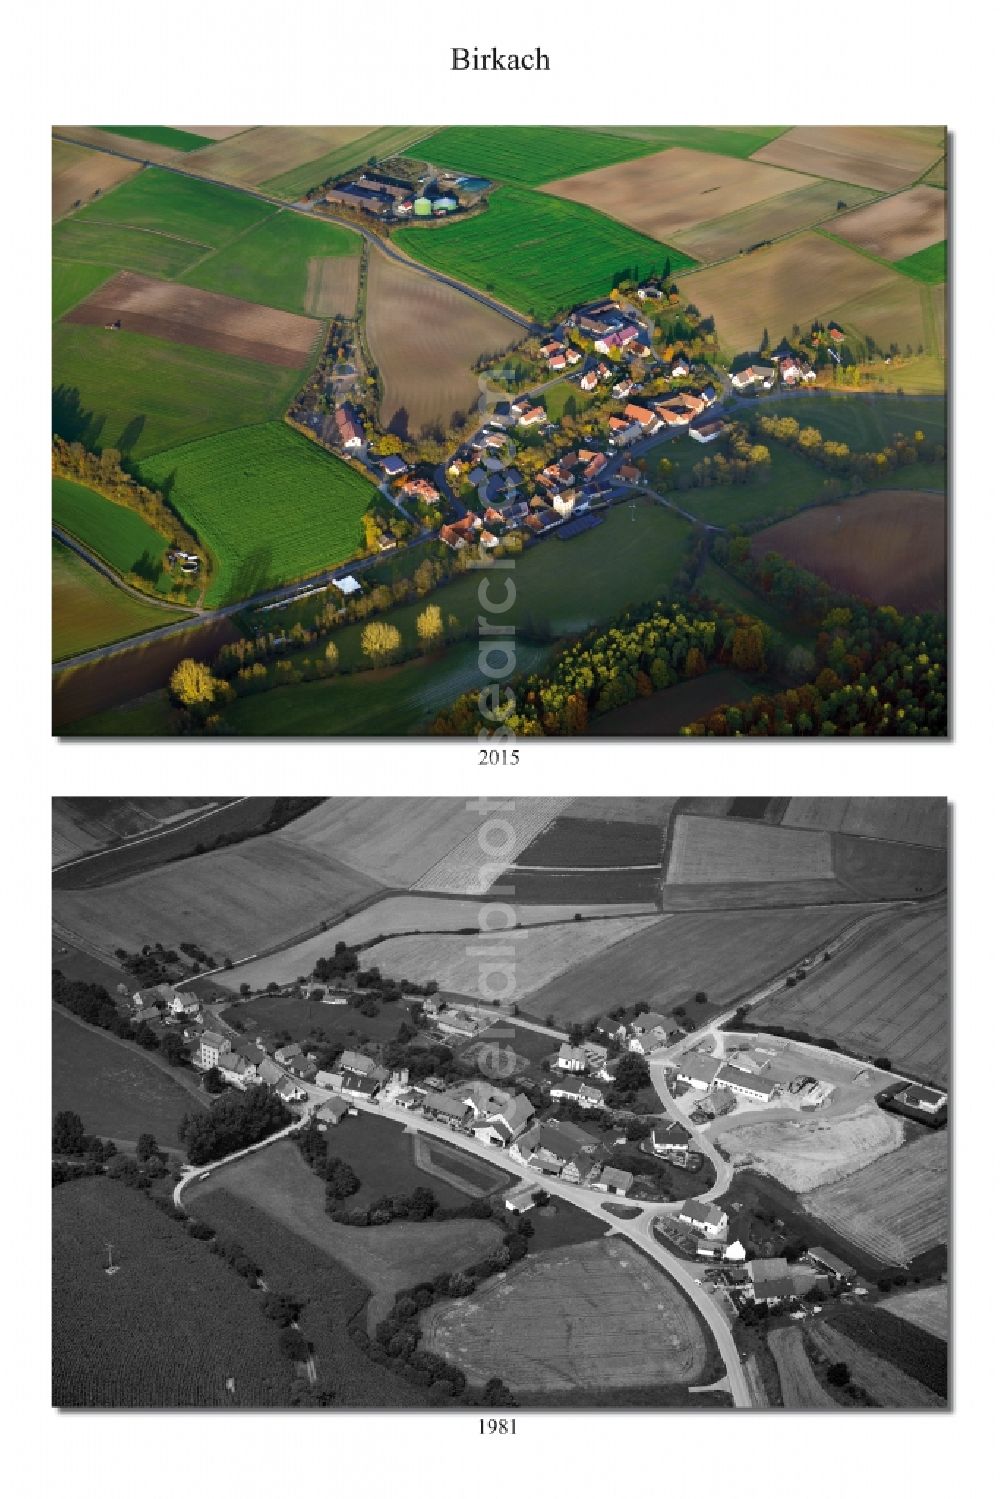 Birkach from above - 1981 and 2015 village - view change of the district of Hassberge belonging municipality in Birkach in the state Bavaria